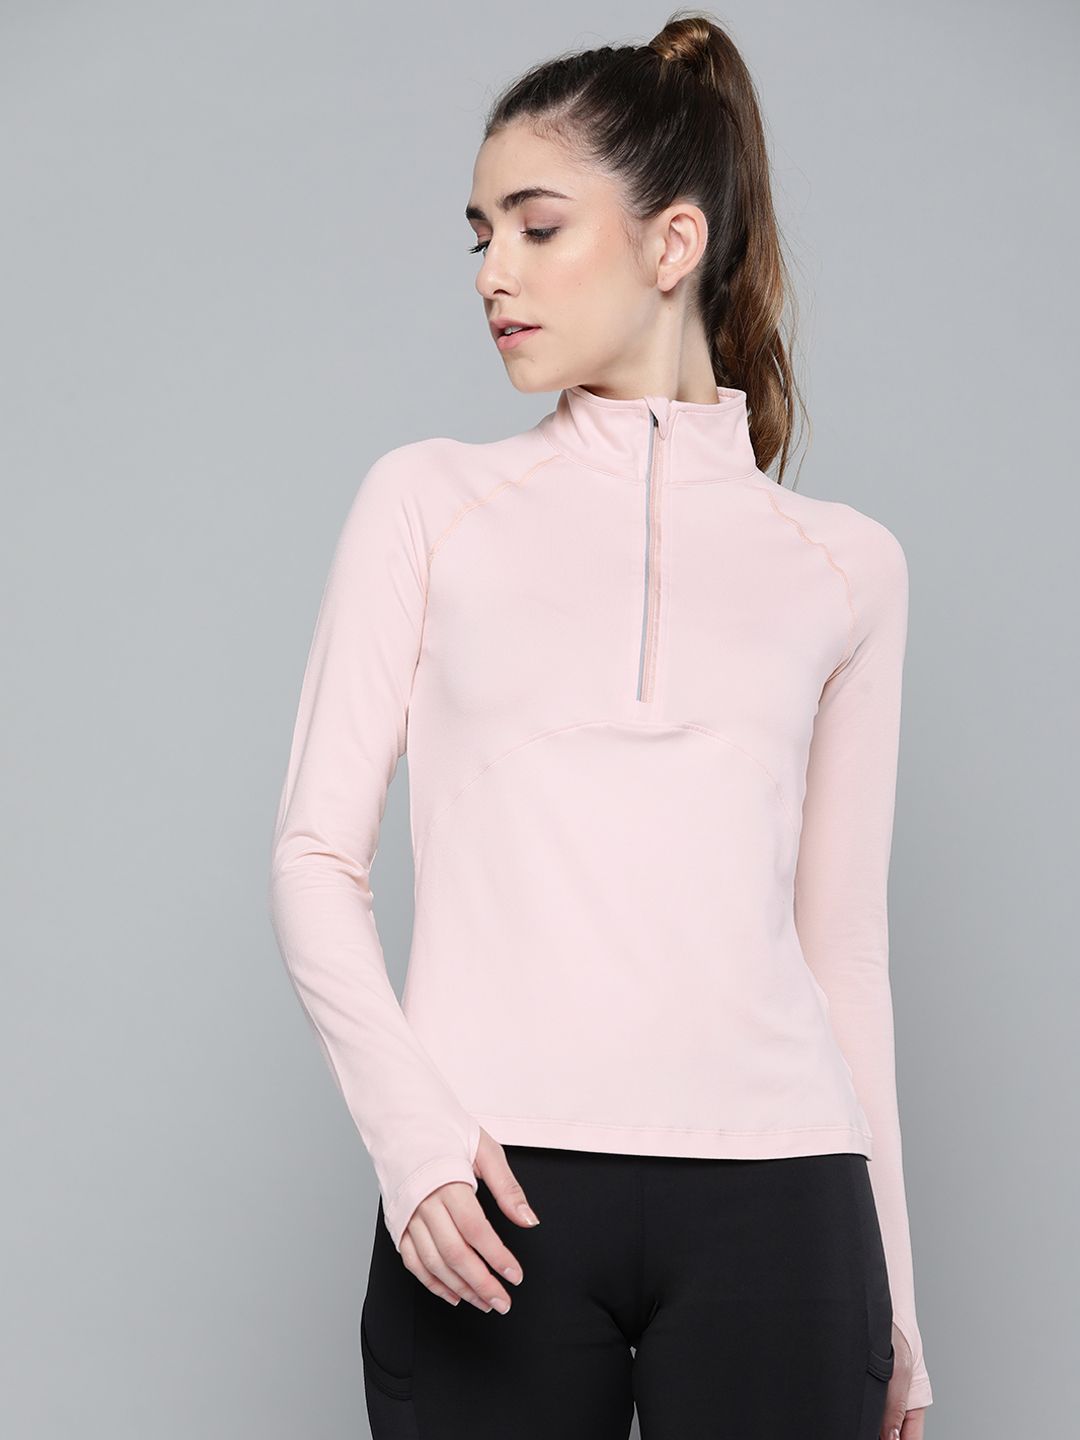 Fitkin Women Pink Solid High Neck Training T-shirt Price in India